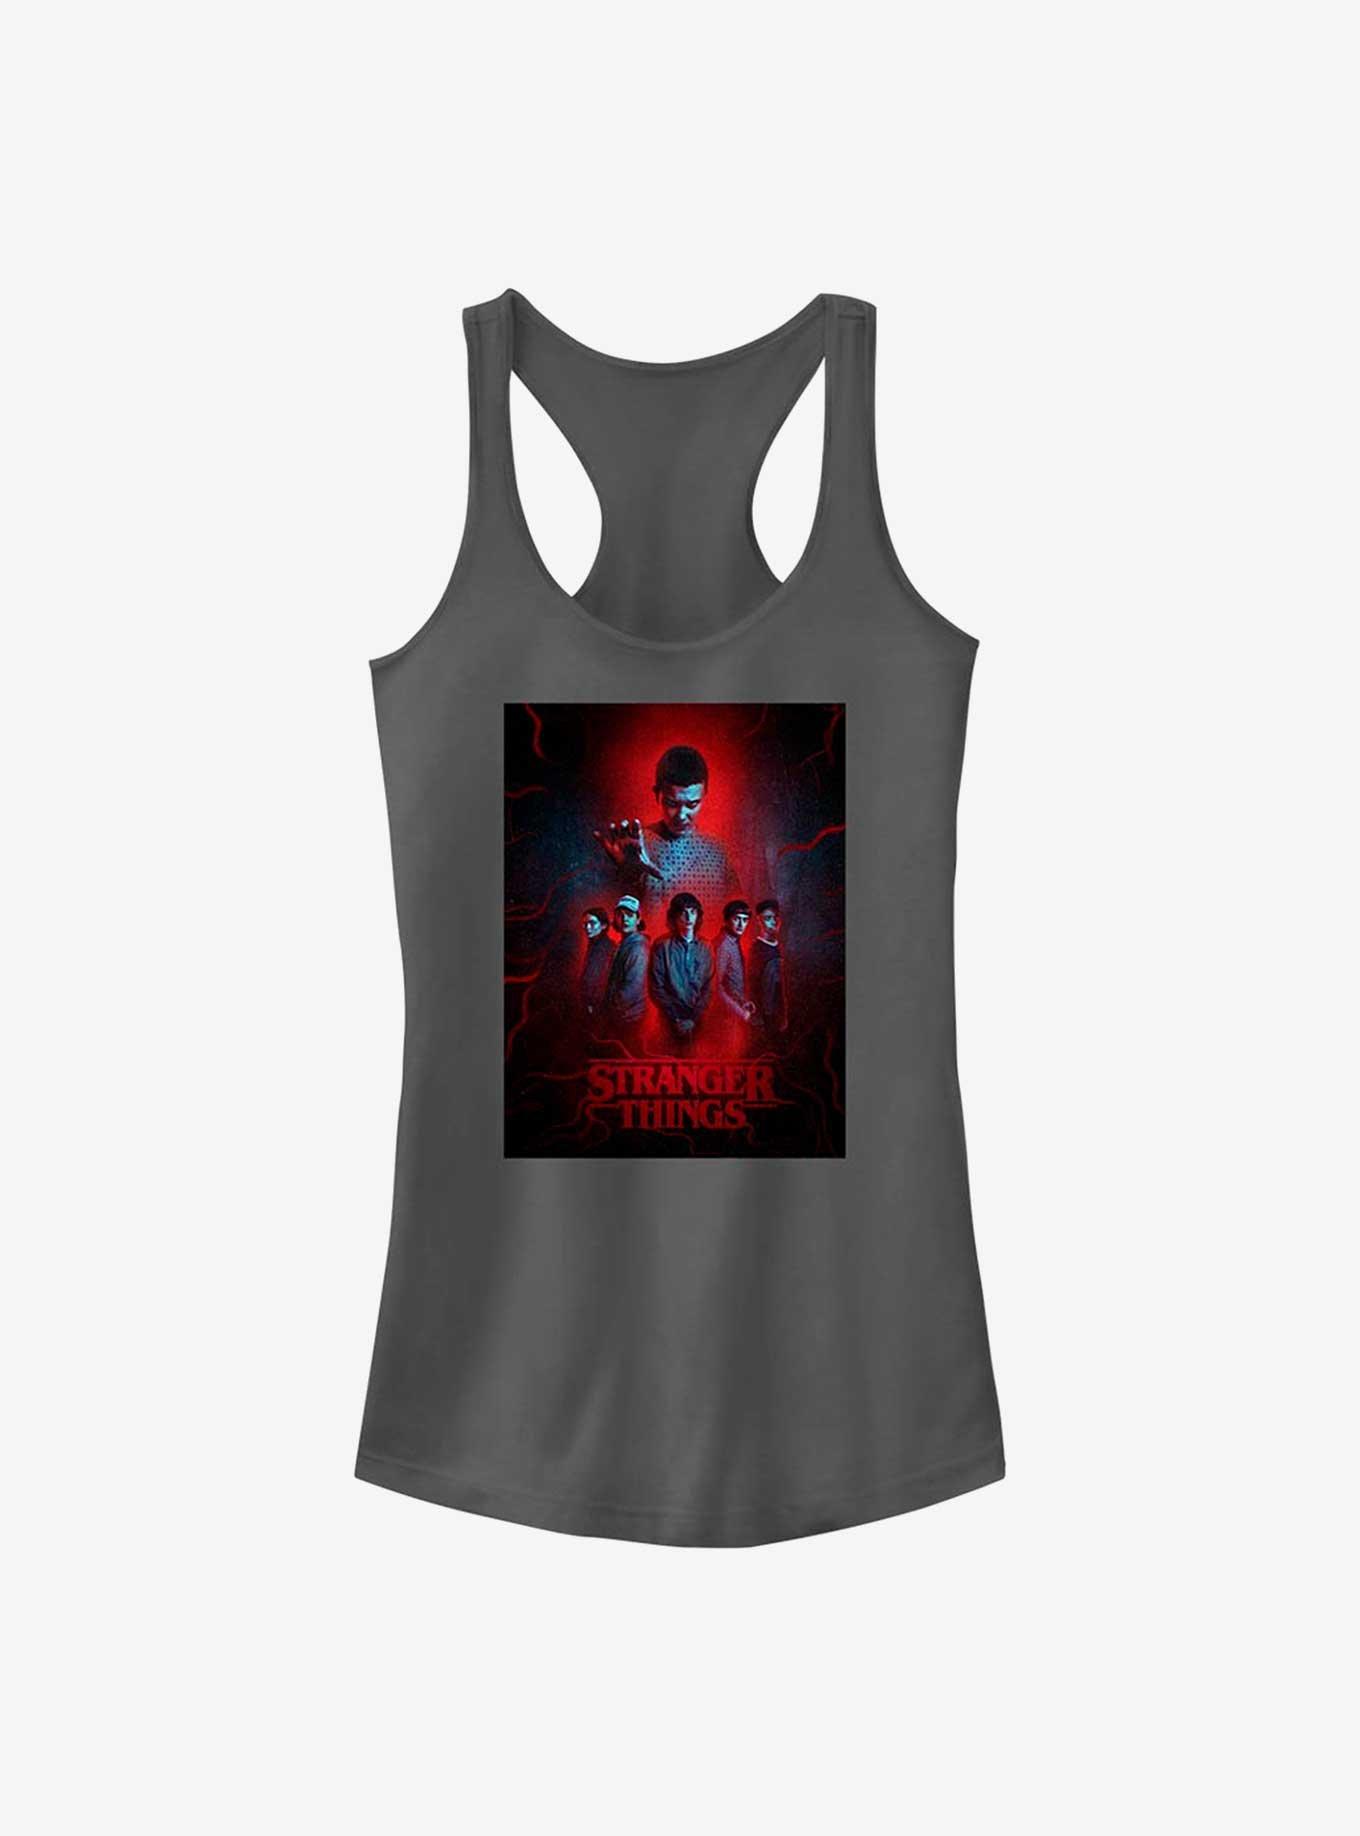 Stranger Things Characters Poster Girls Tank